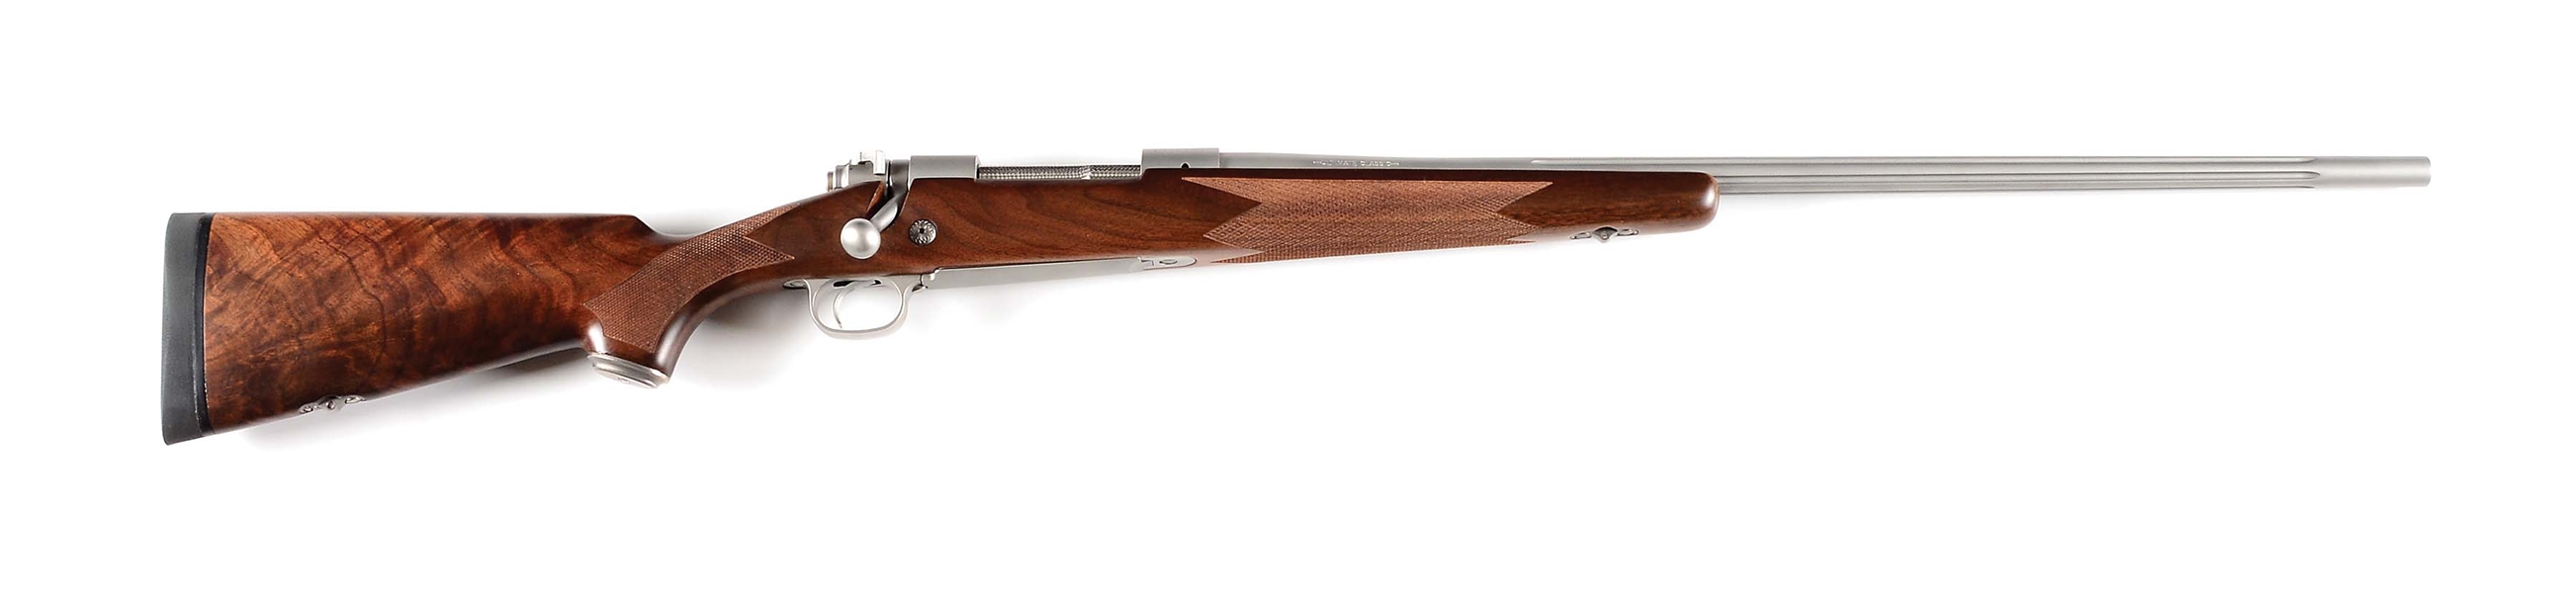 (M) WINCHESTER MODEL 70 ULTIMATE CLASSIC BOLT ACTION RIFLE.